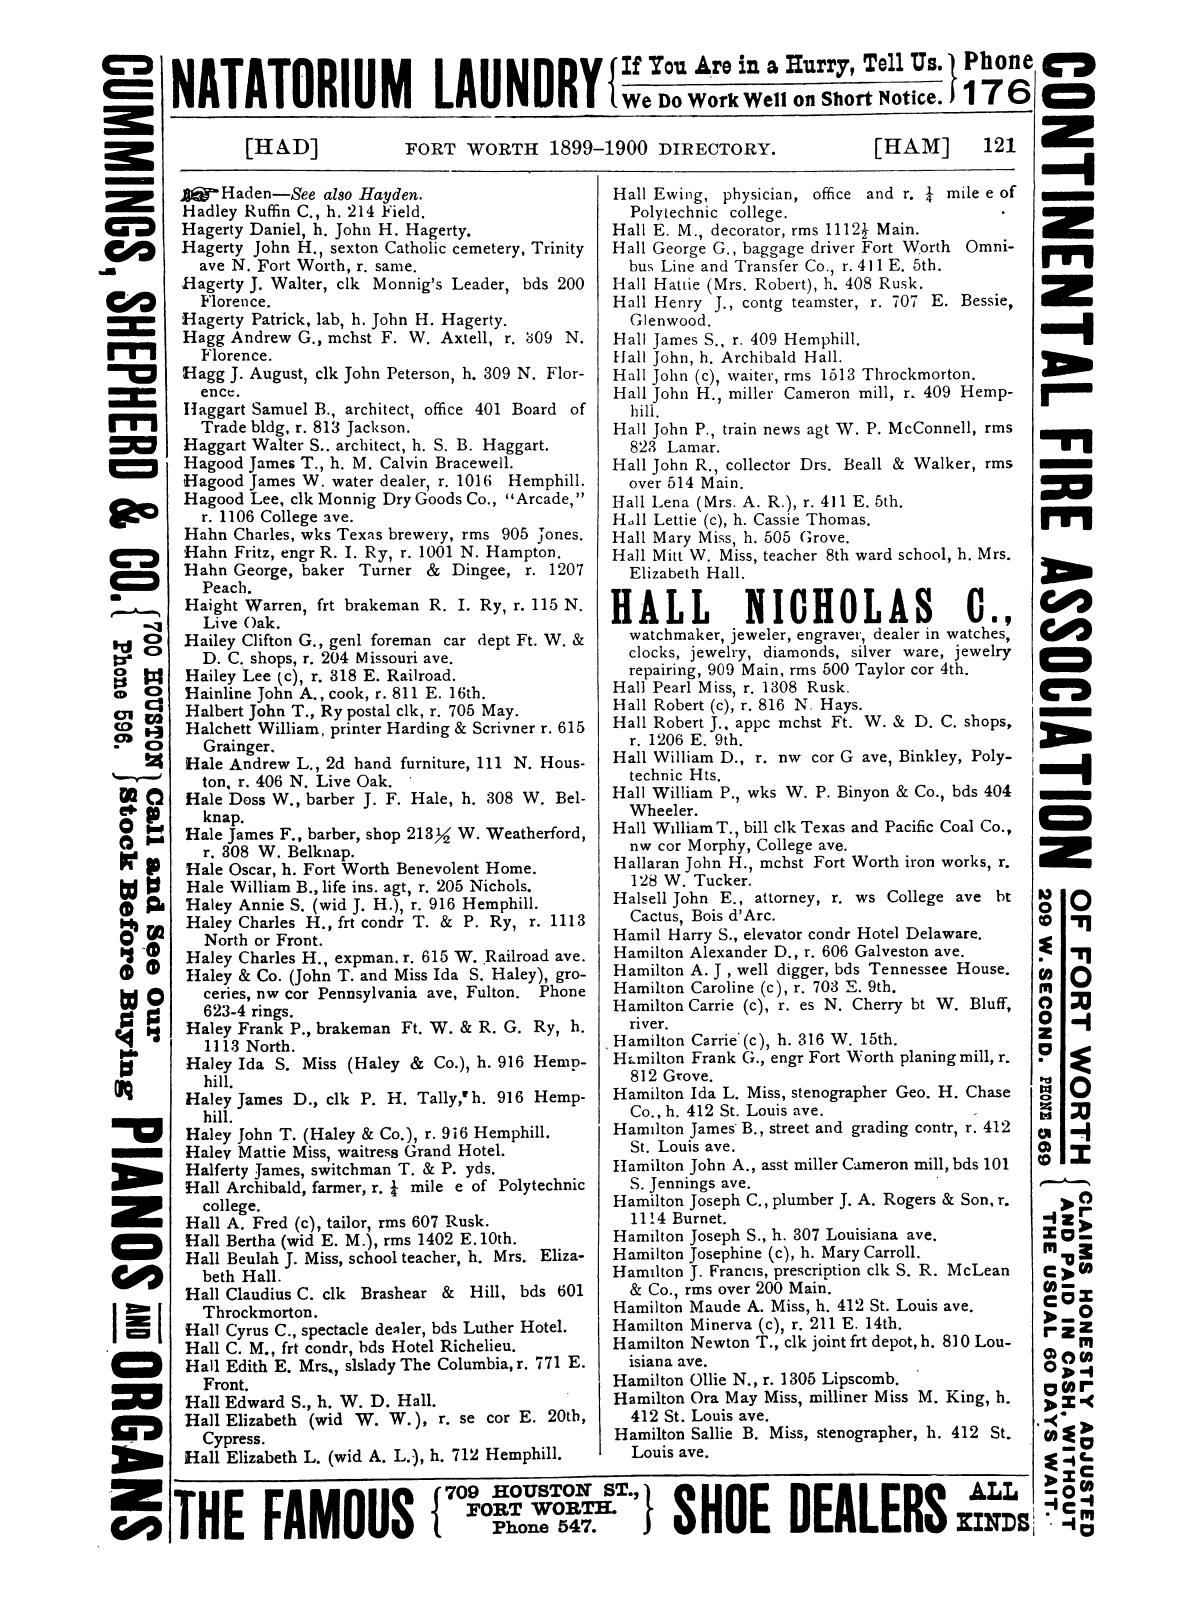 Morrison & Fourmy's General Directory of the City of Fort Worth 1899-1900.
                                                
                                                    121
                                                